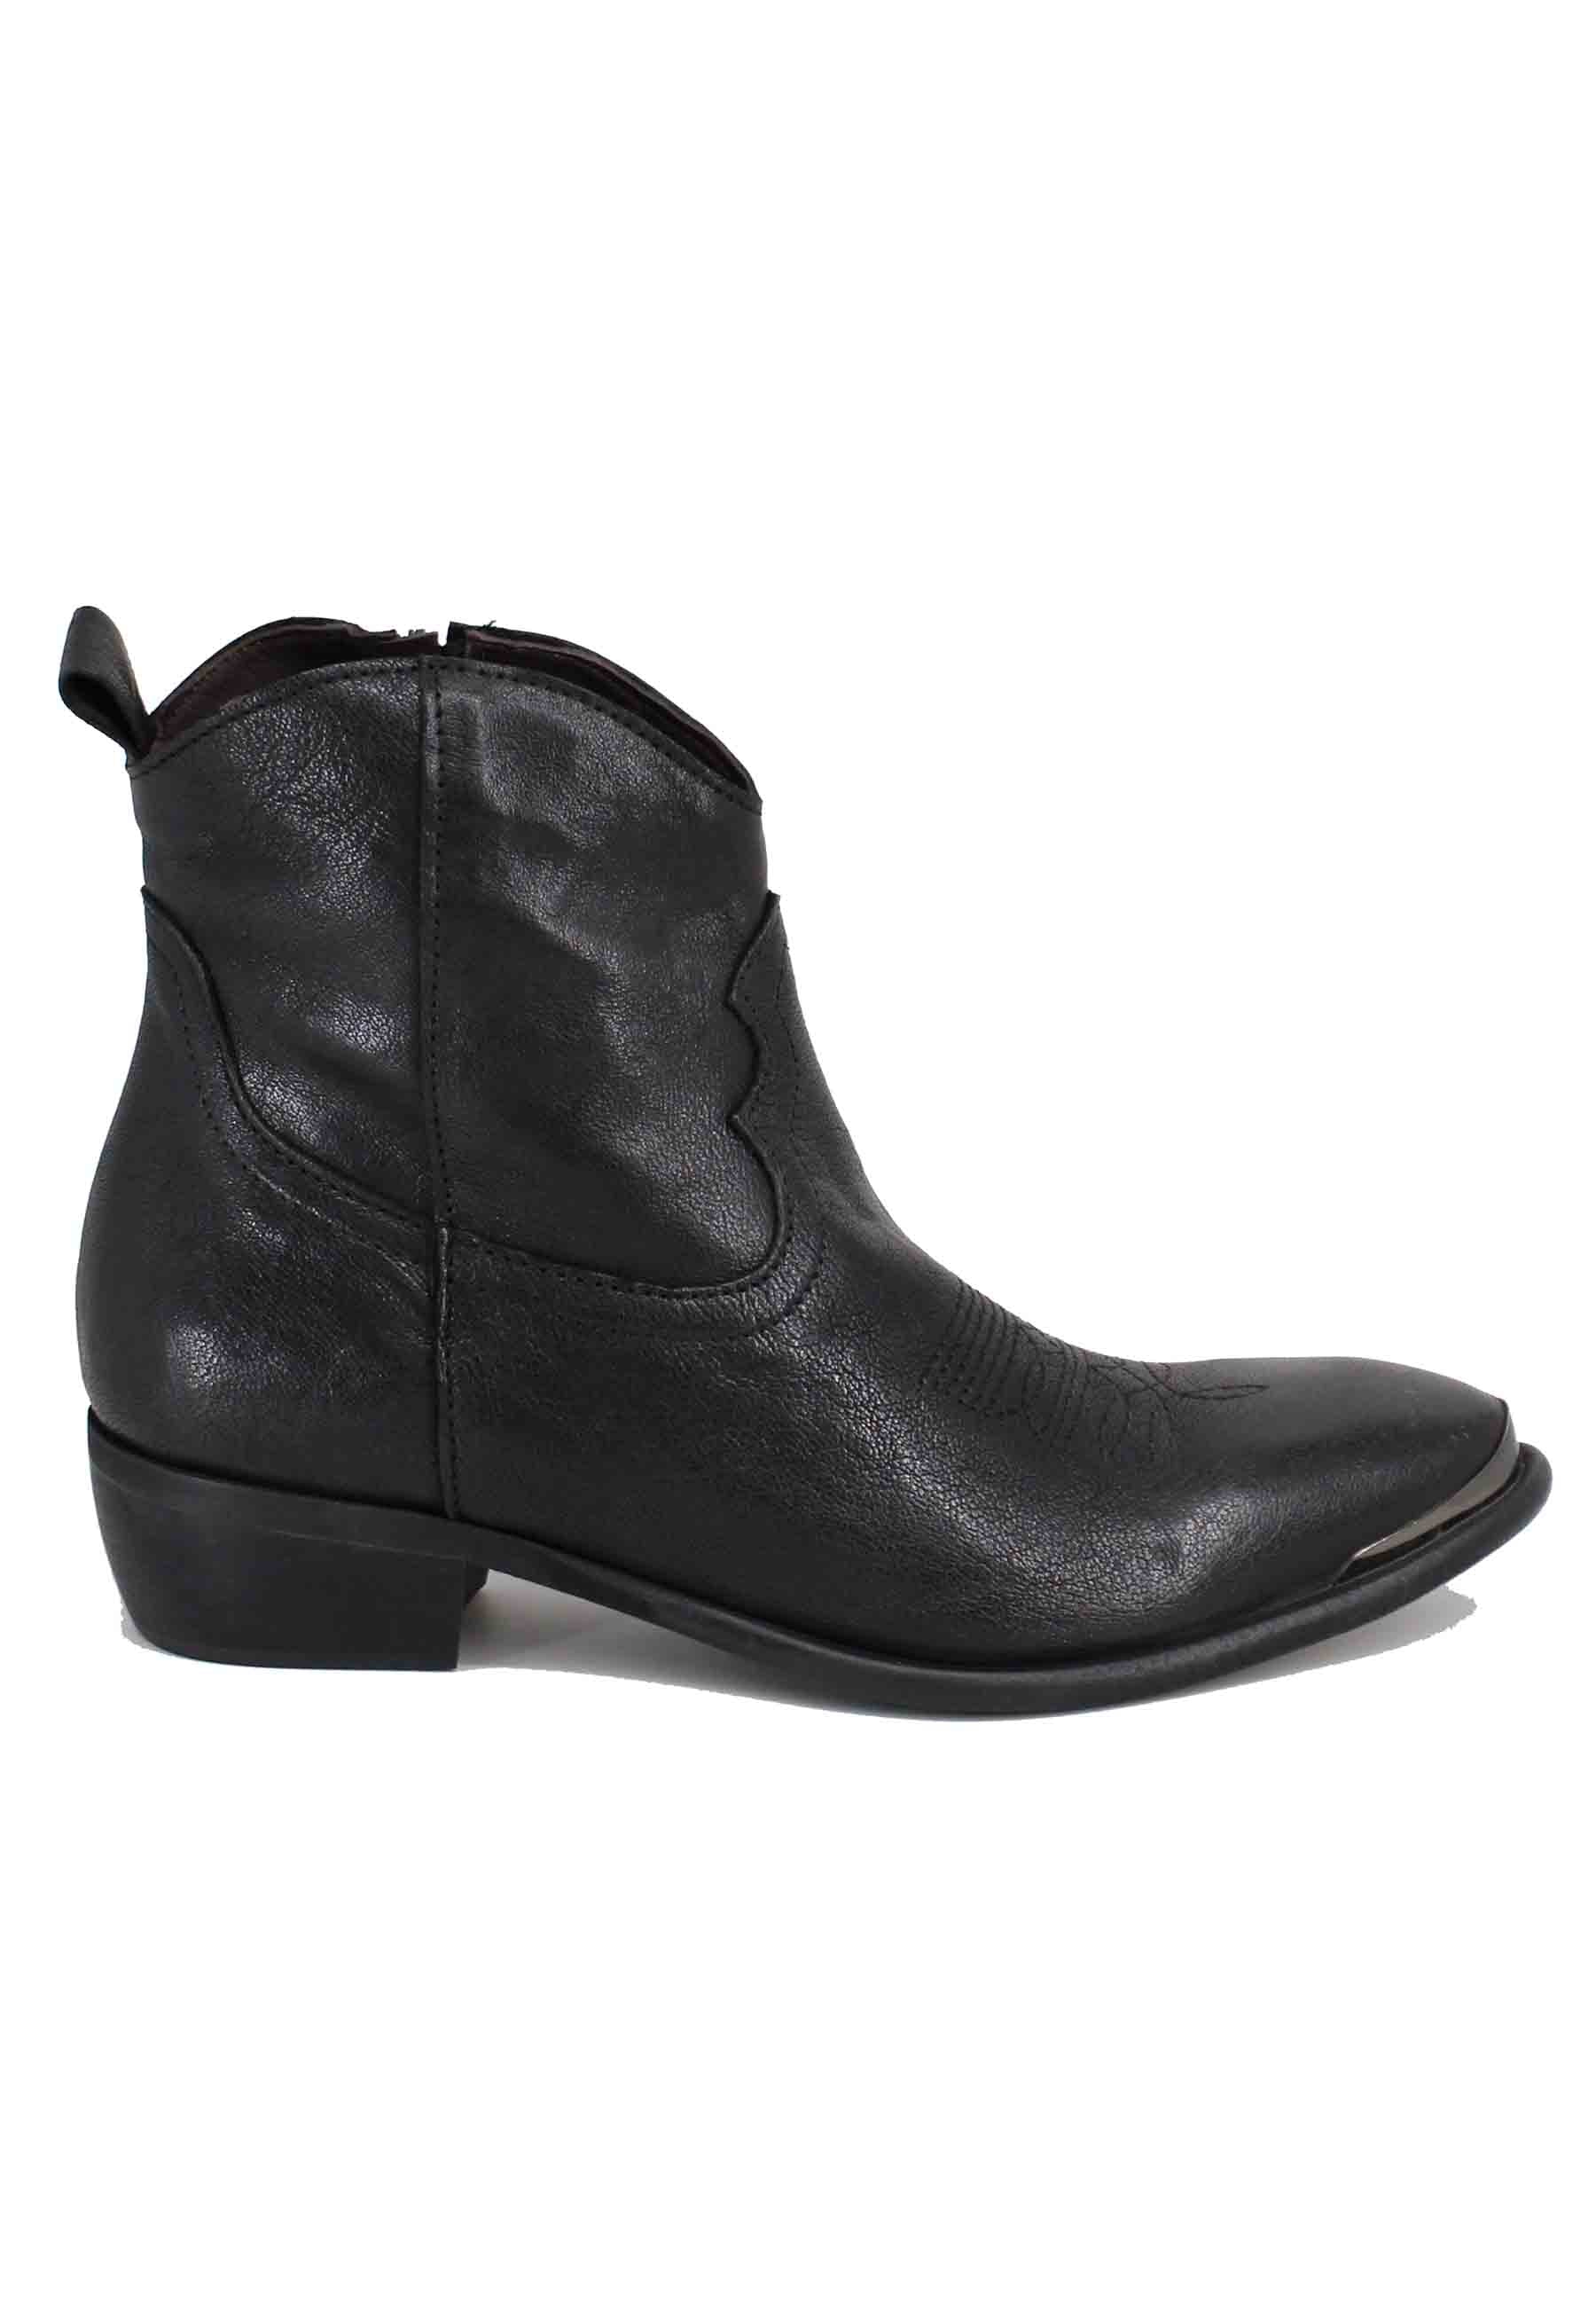 Women's Texan boots in black leather with toe cap